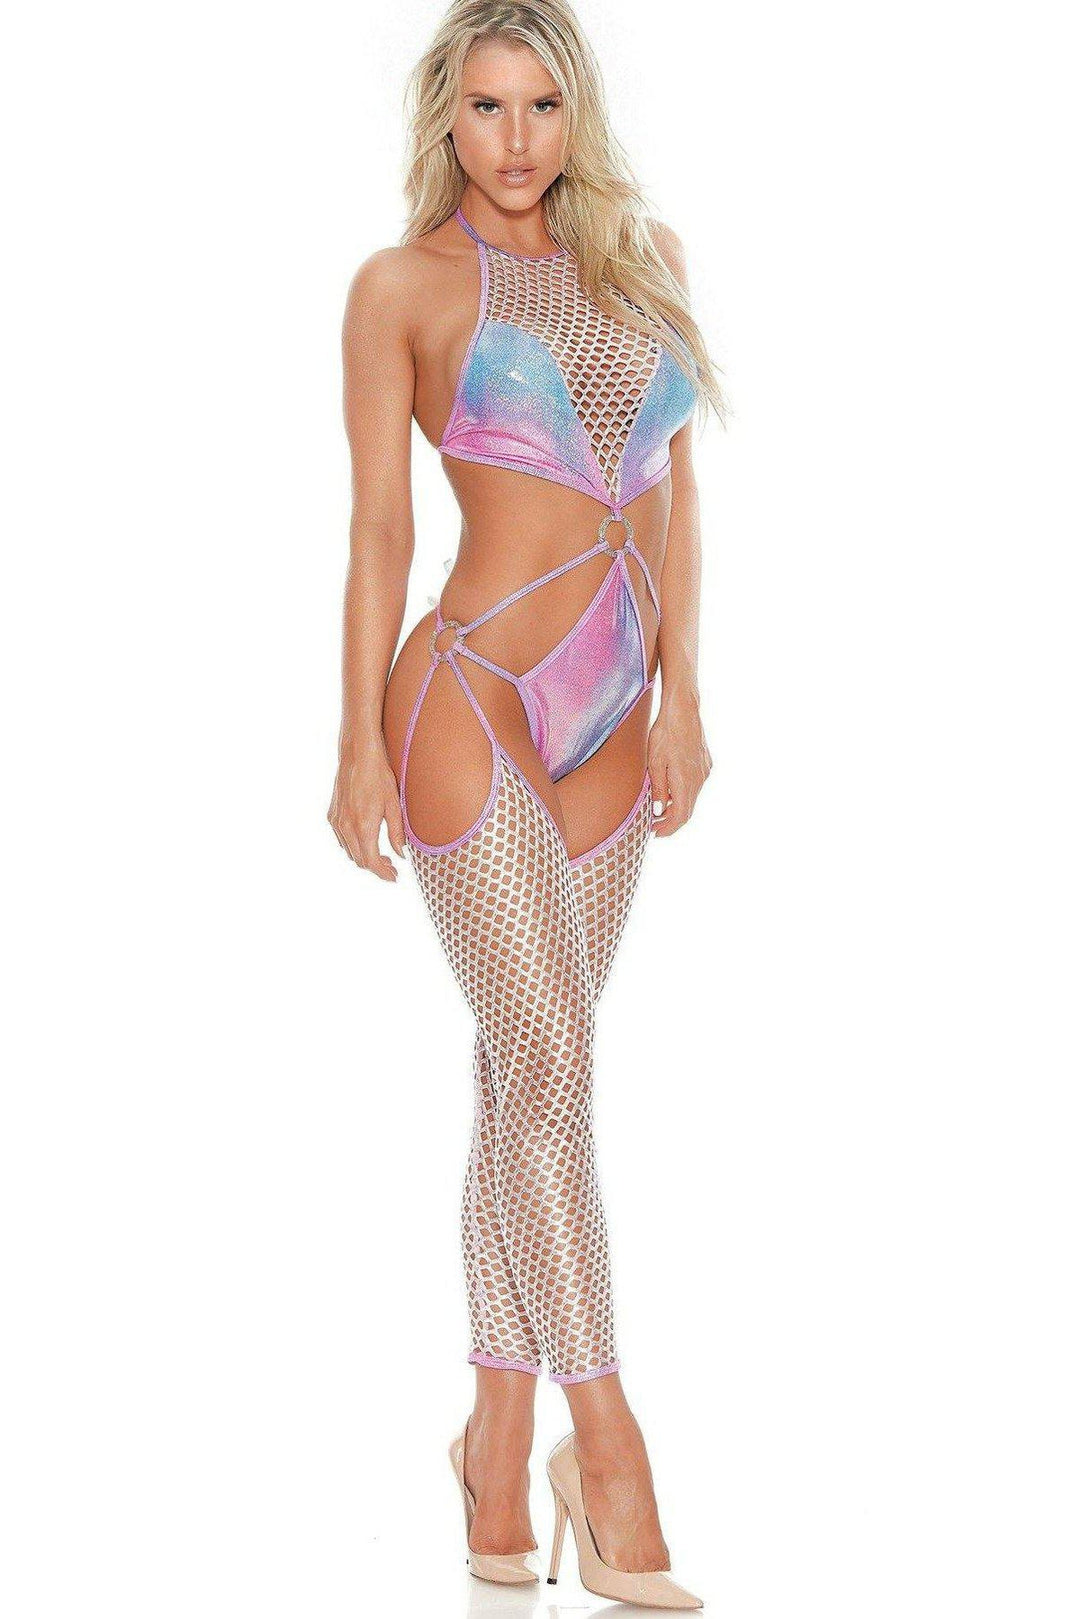 Bodysuit With Attached Net Leggings-Dancewear Rompers-Bodyshotz-Pink-O/S-SEXYSHOES.COM